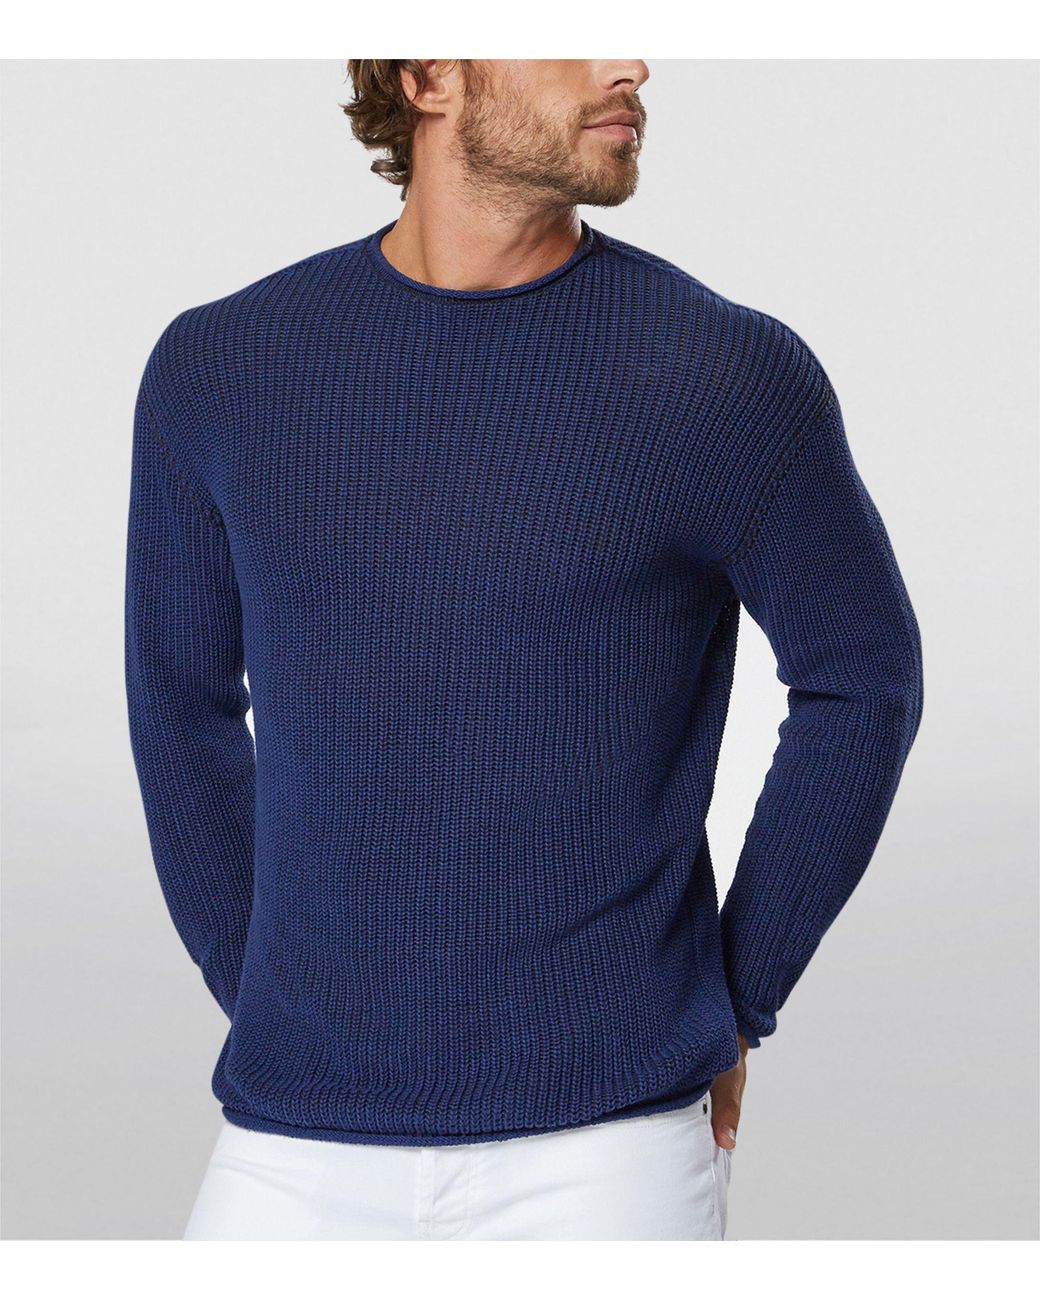 Sease Cotton Rib-knit Ketch Sweater in Blue for Men - Lyst